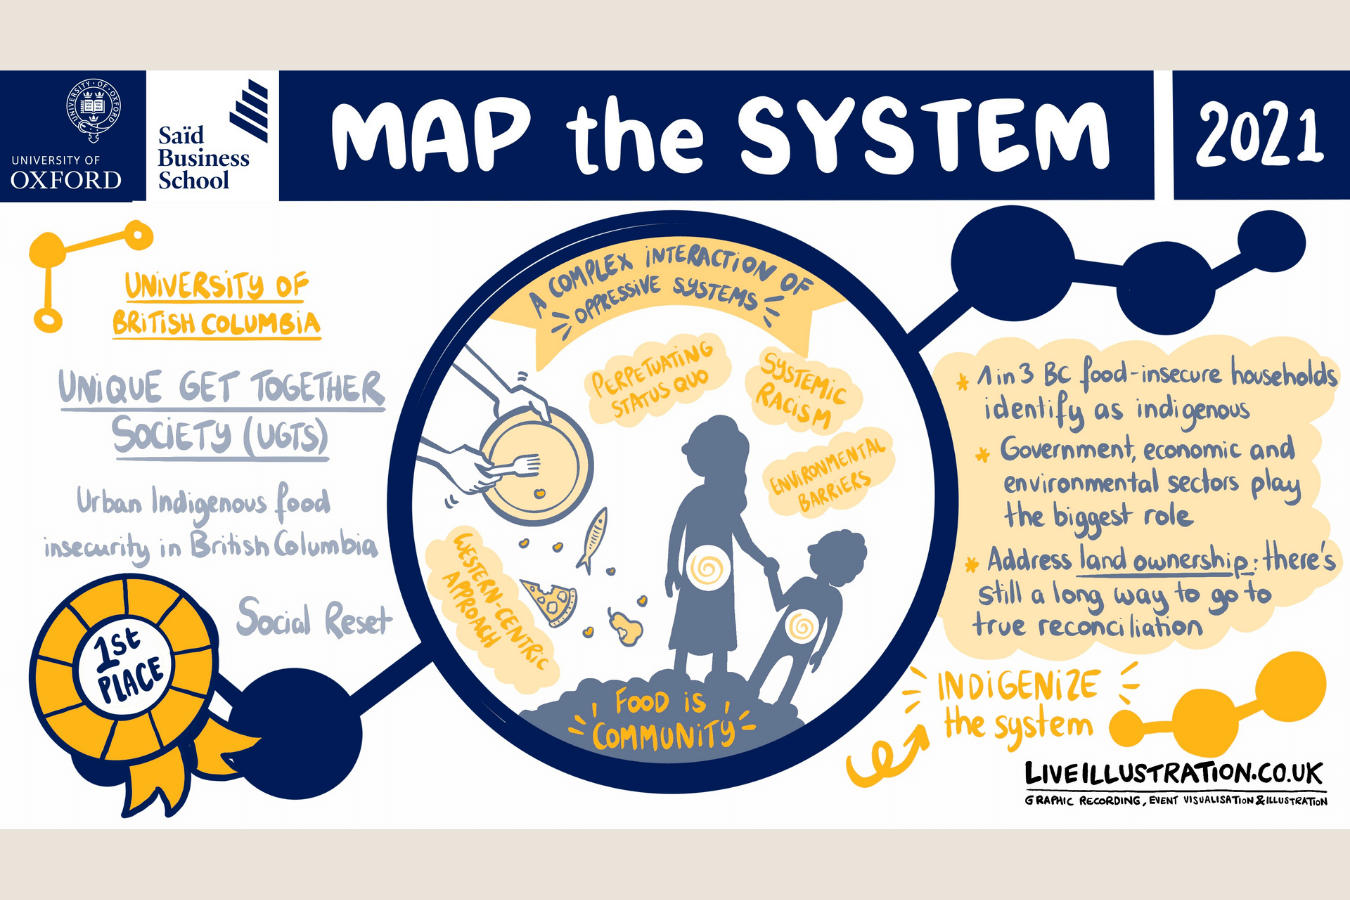 Map the System 2021 finalist's Live Scribed Illustrations from University of British Columbia